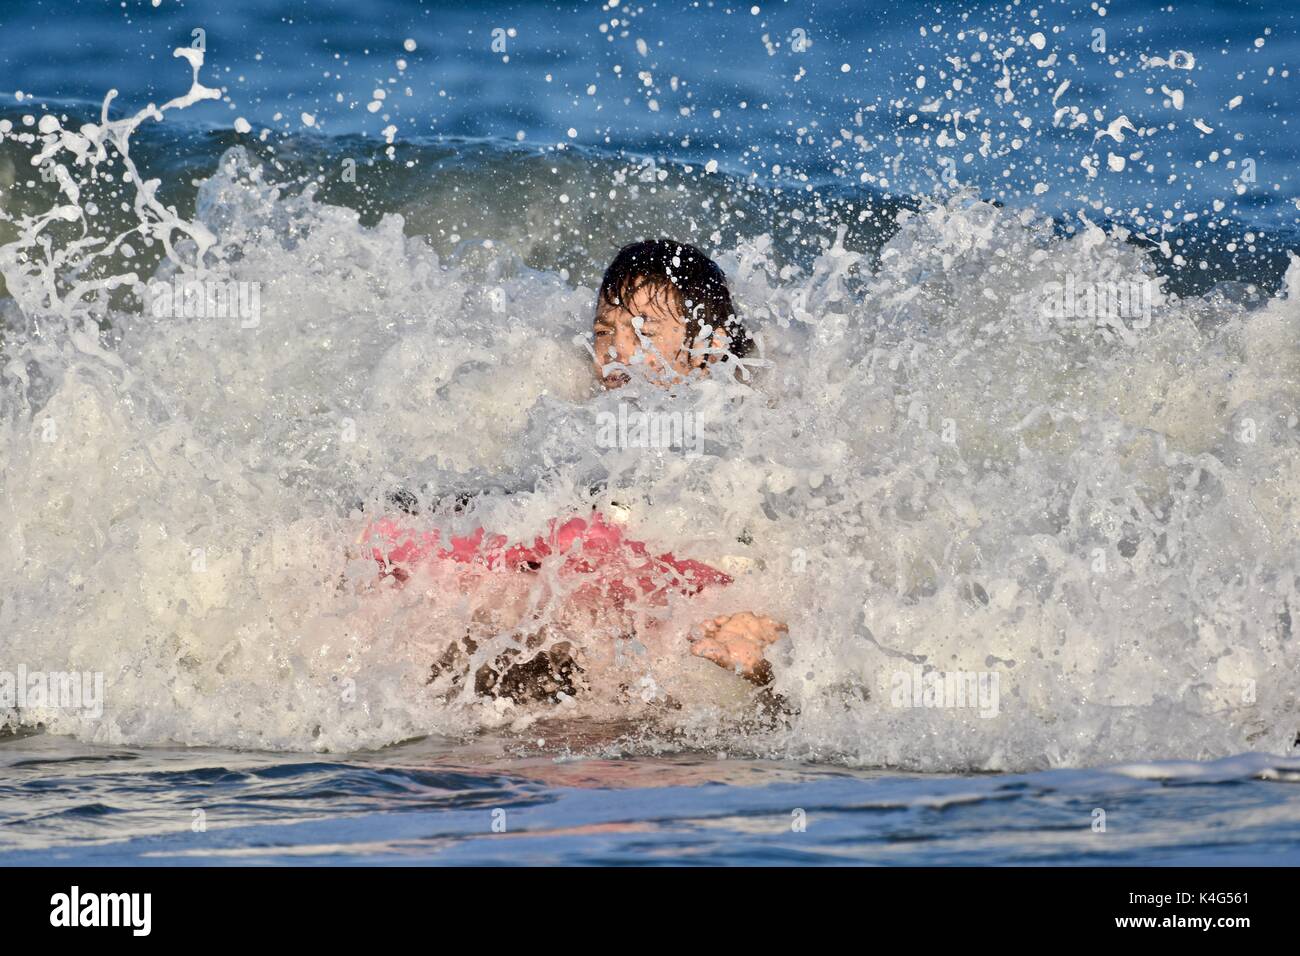 Riding waves with a boogie board at the ocean Stock Photo